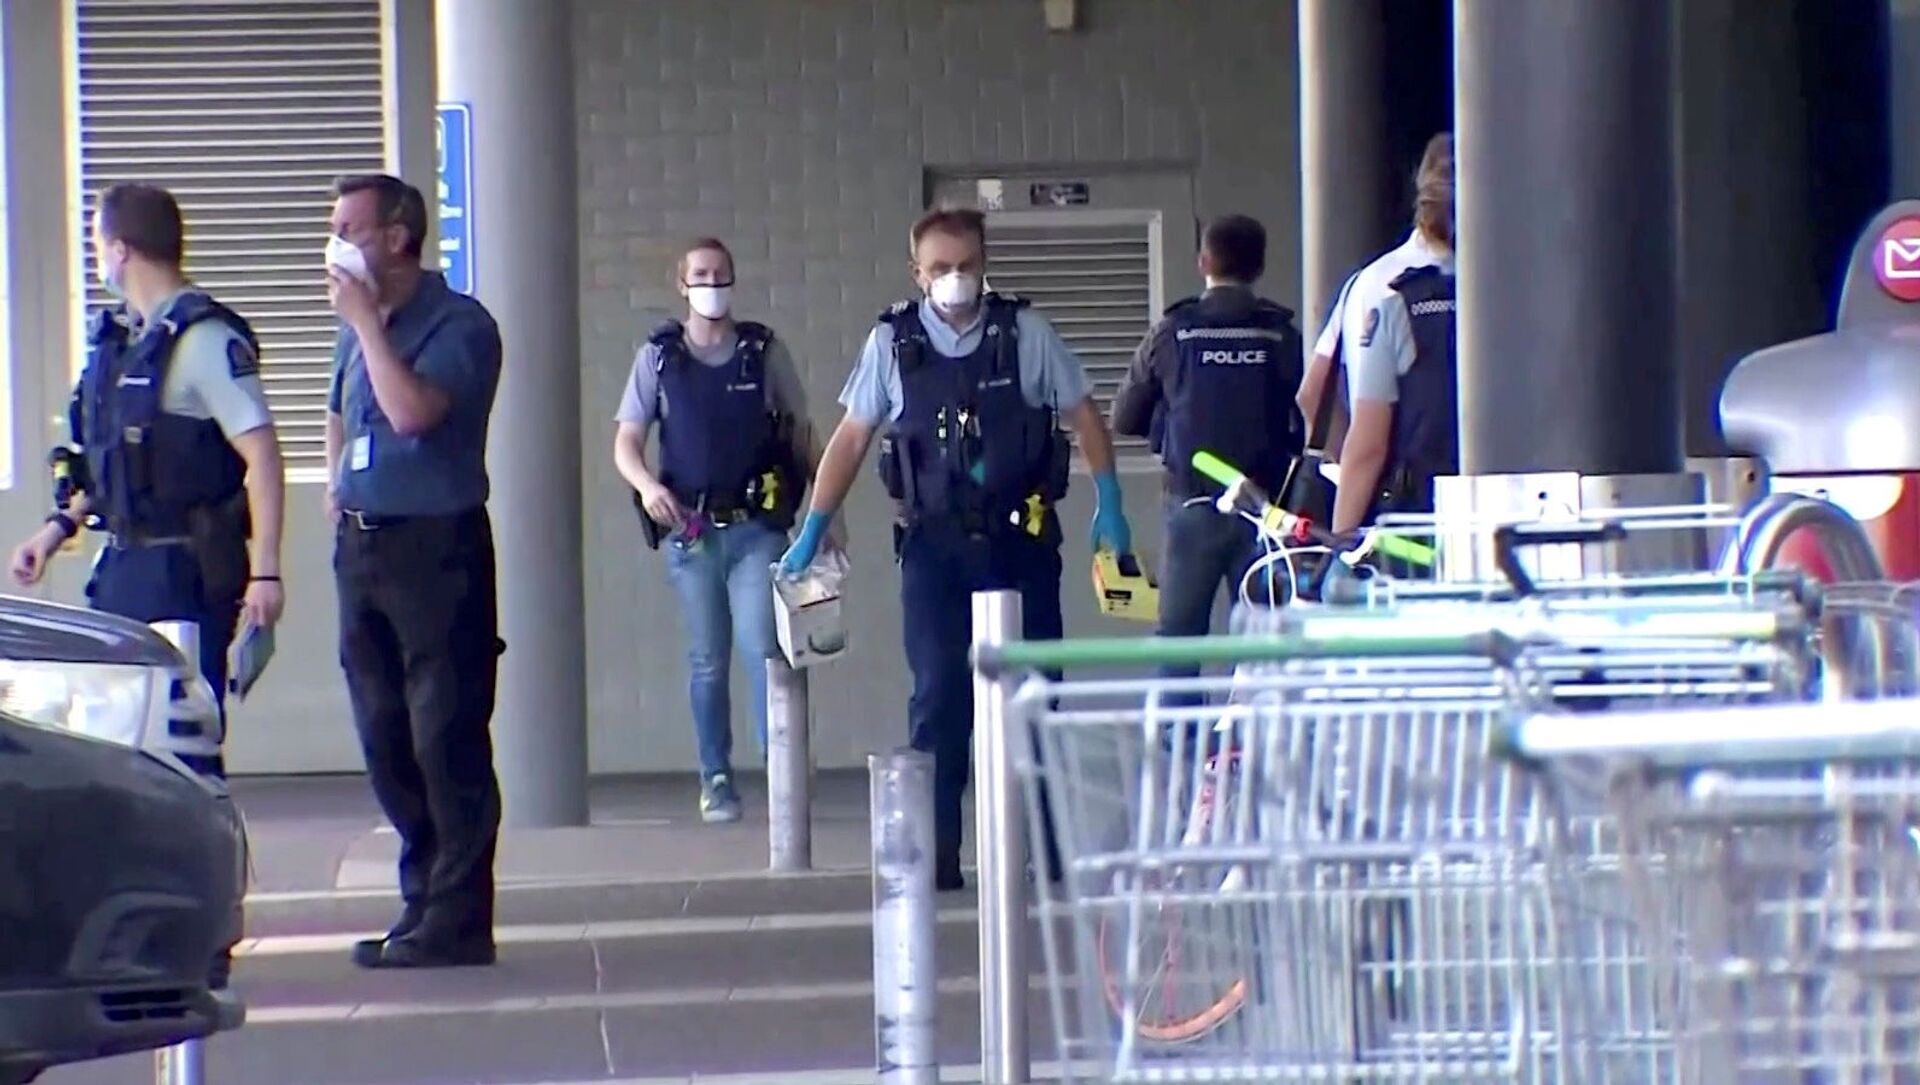 A screen grab shows police officers working outside a shopping mall following a knife attack in Auckland, New Zealand September 3, 202 - Sputnik International, 1920, 03.09.2021